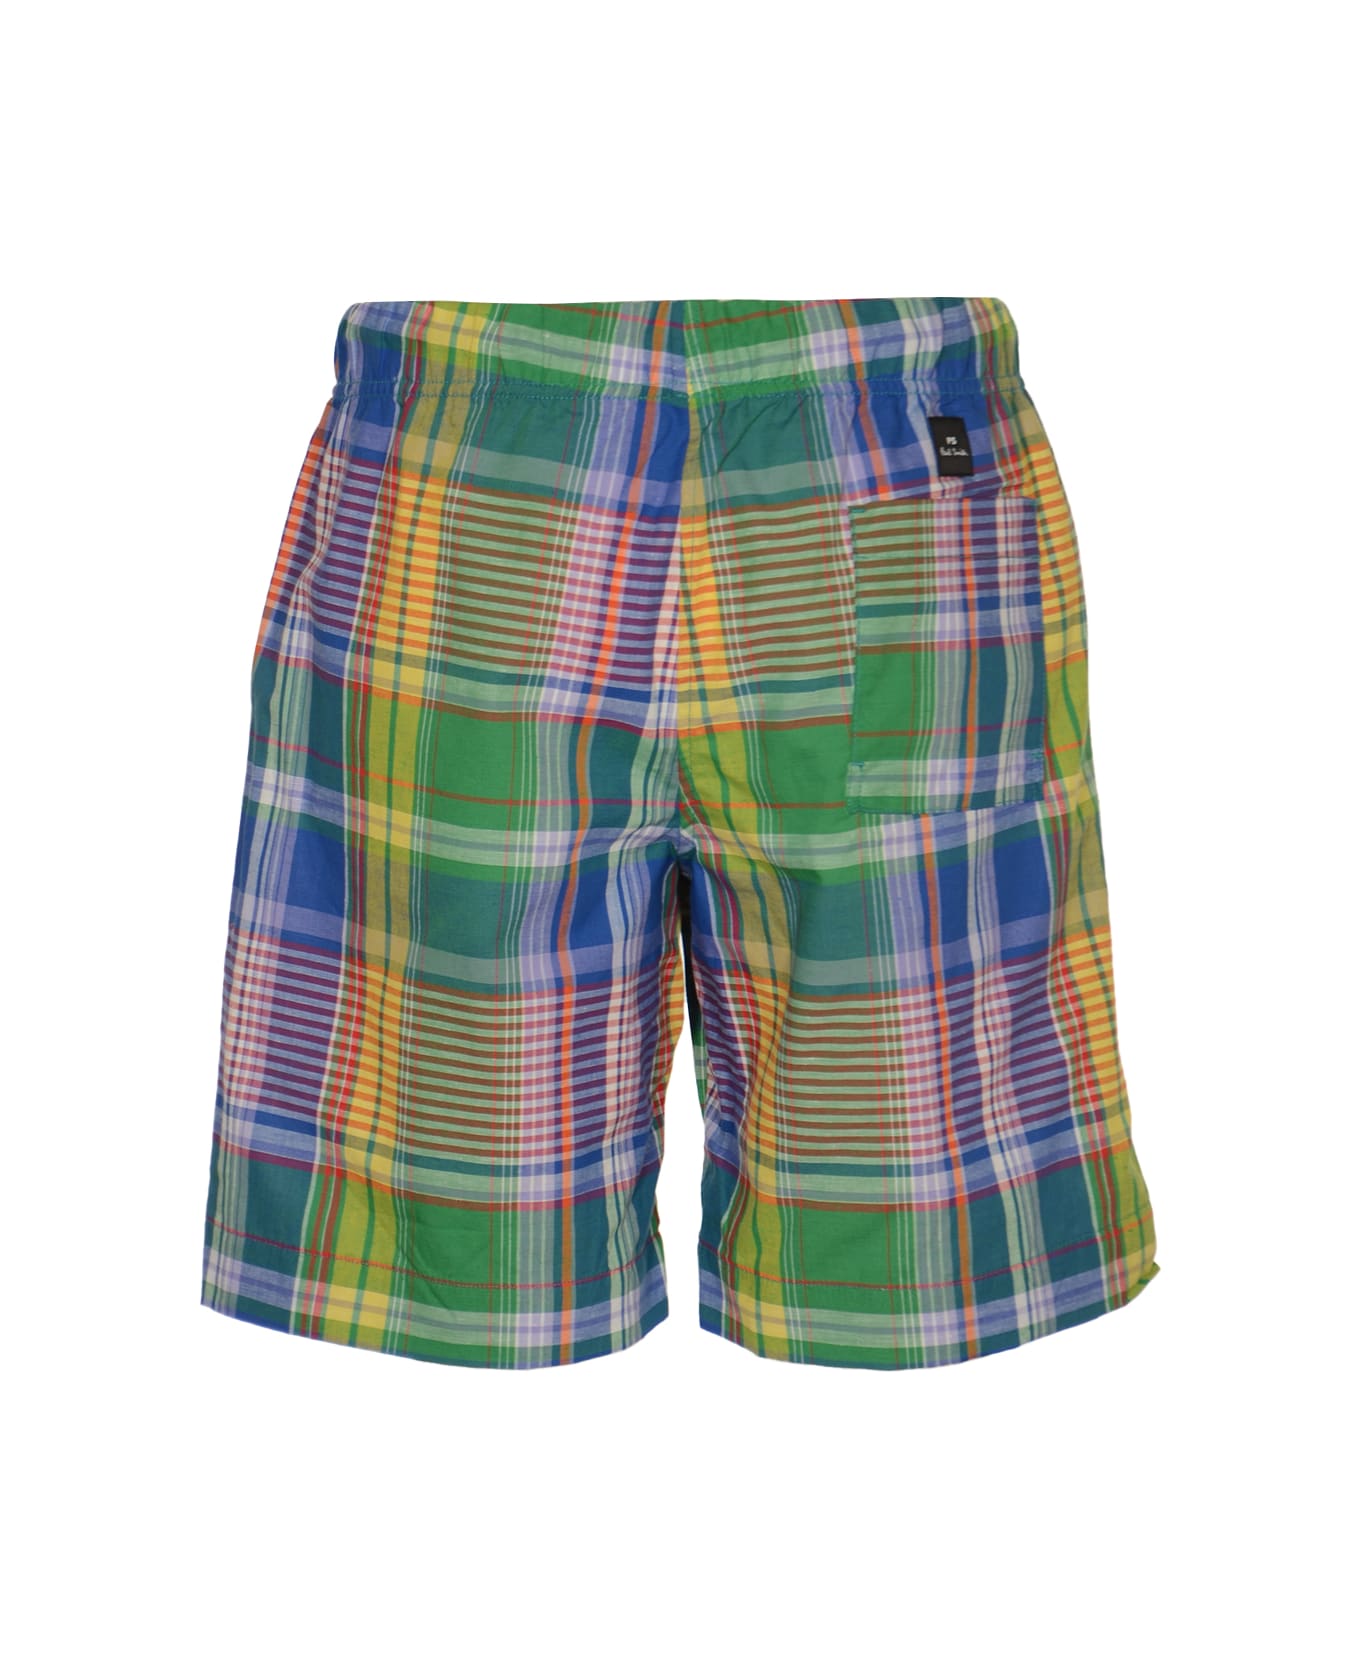 Paul Smith Drawstring Waist Check Patterned Shorts - Multicolor